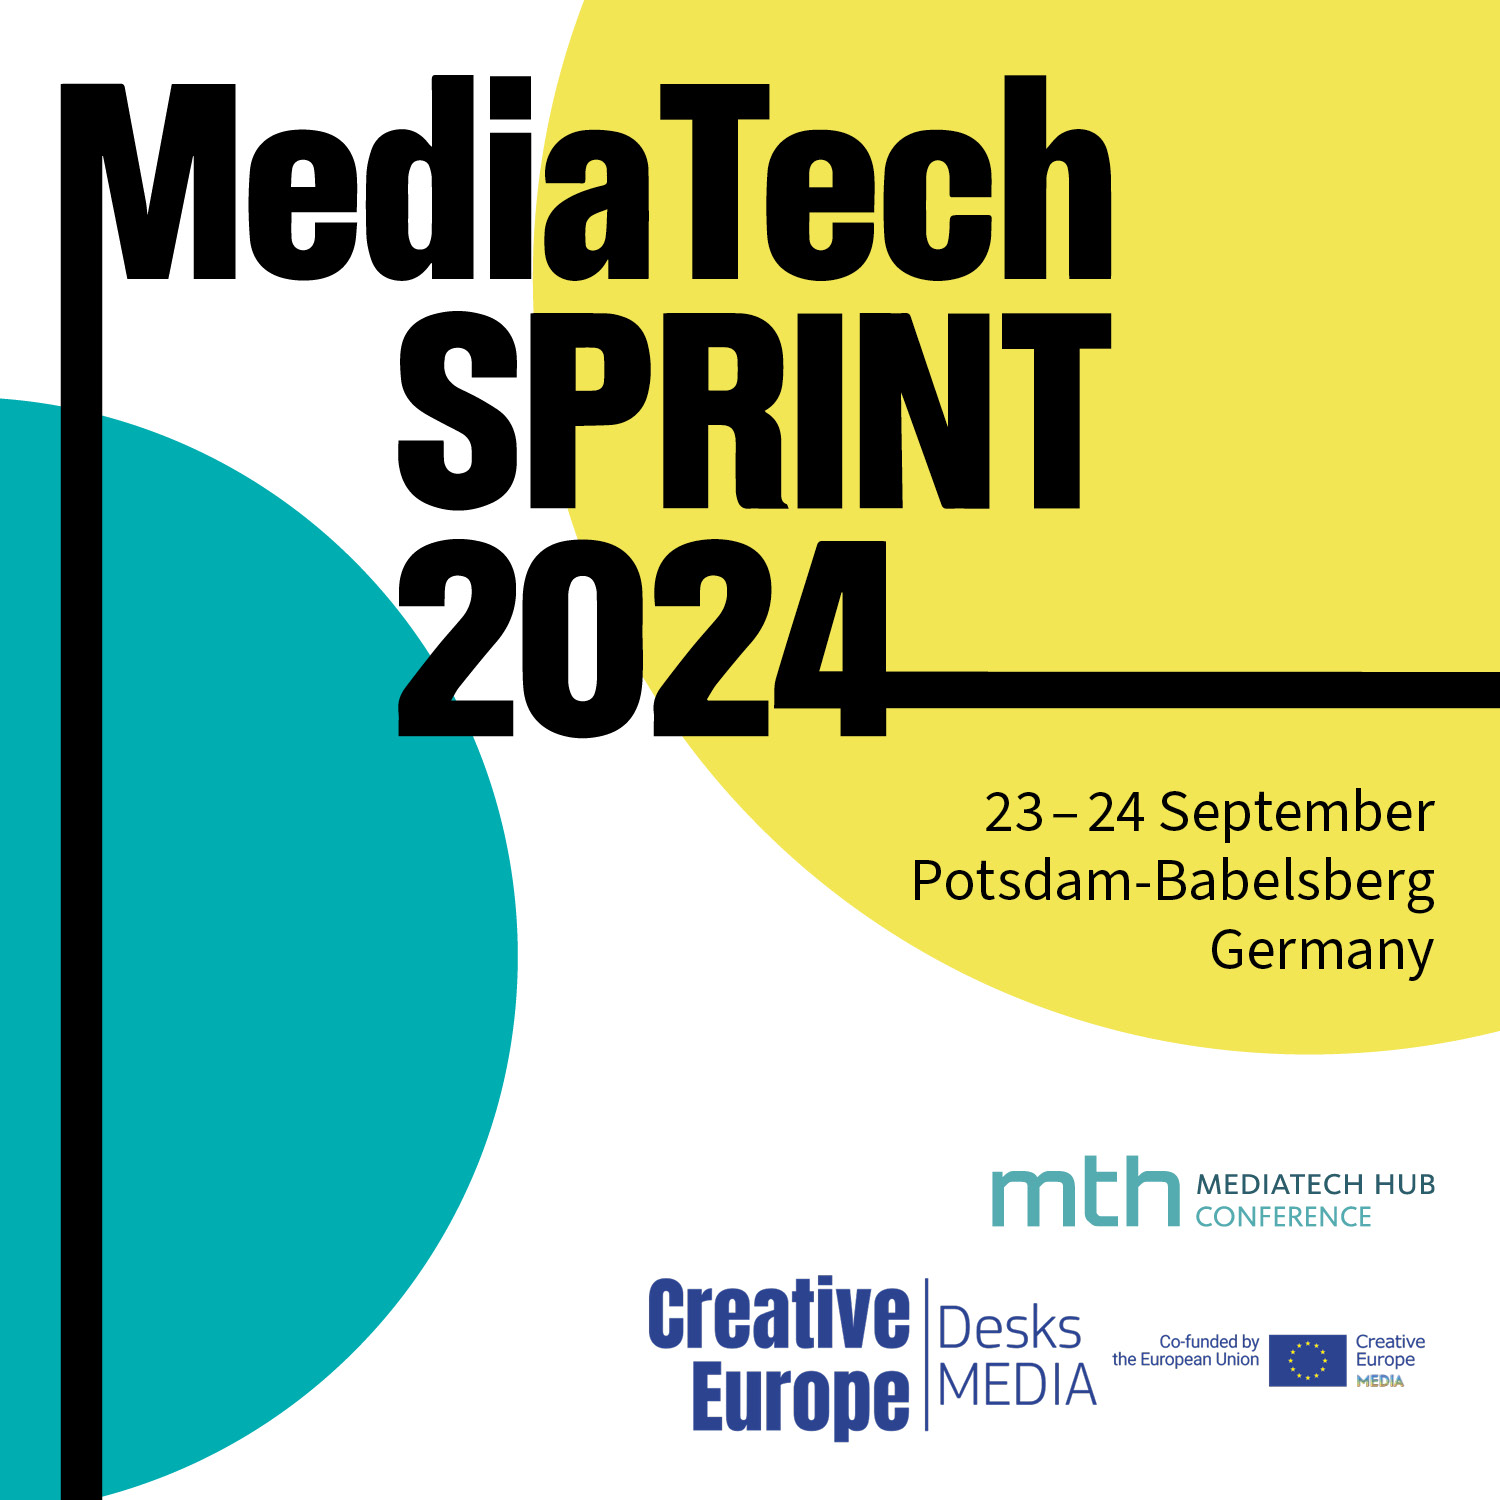 Join the 6th MediaTech SPRINT at #MTHCON24!